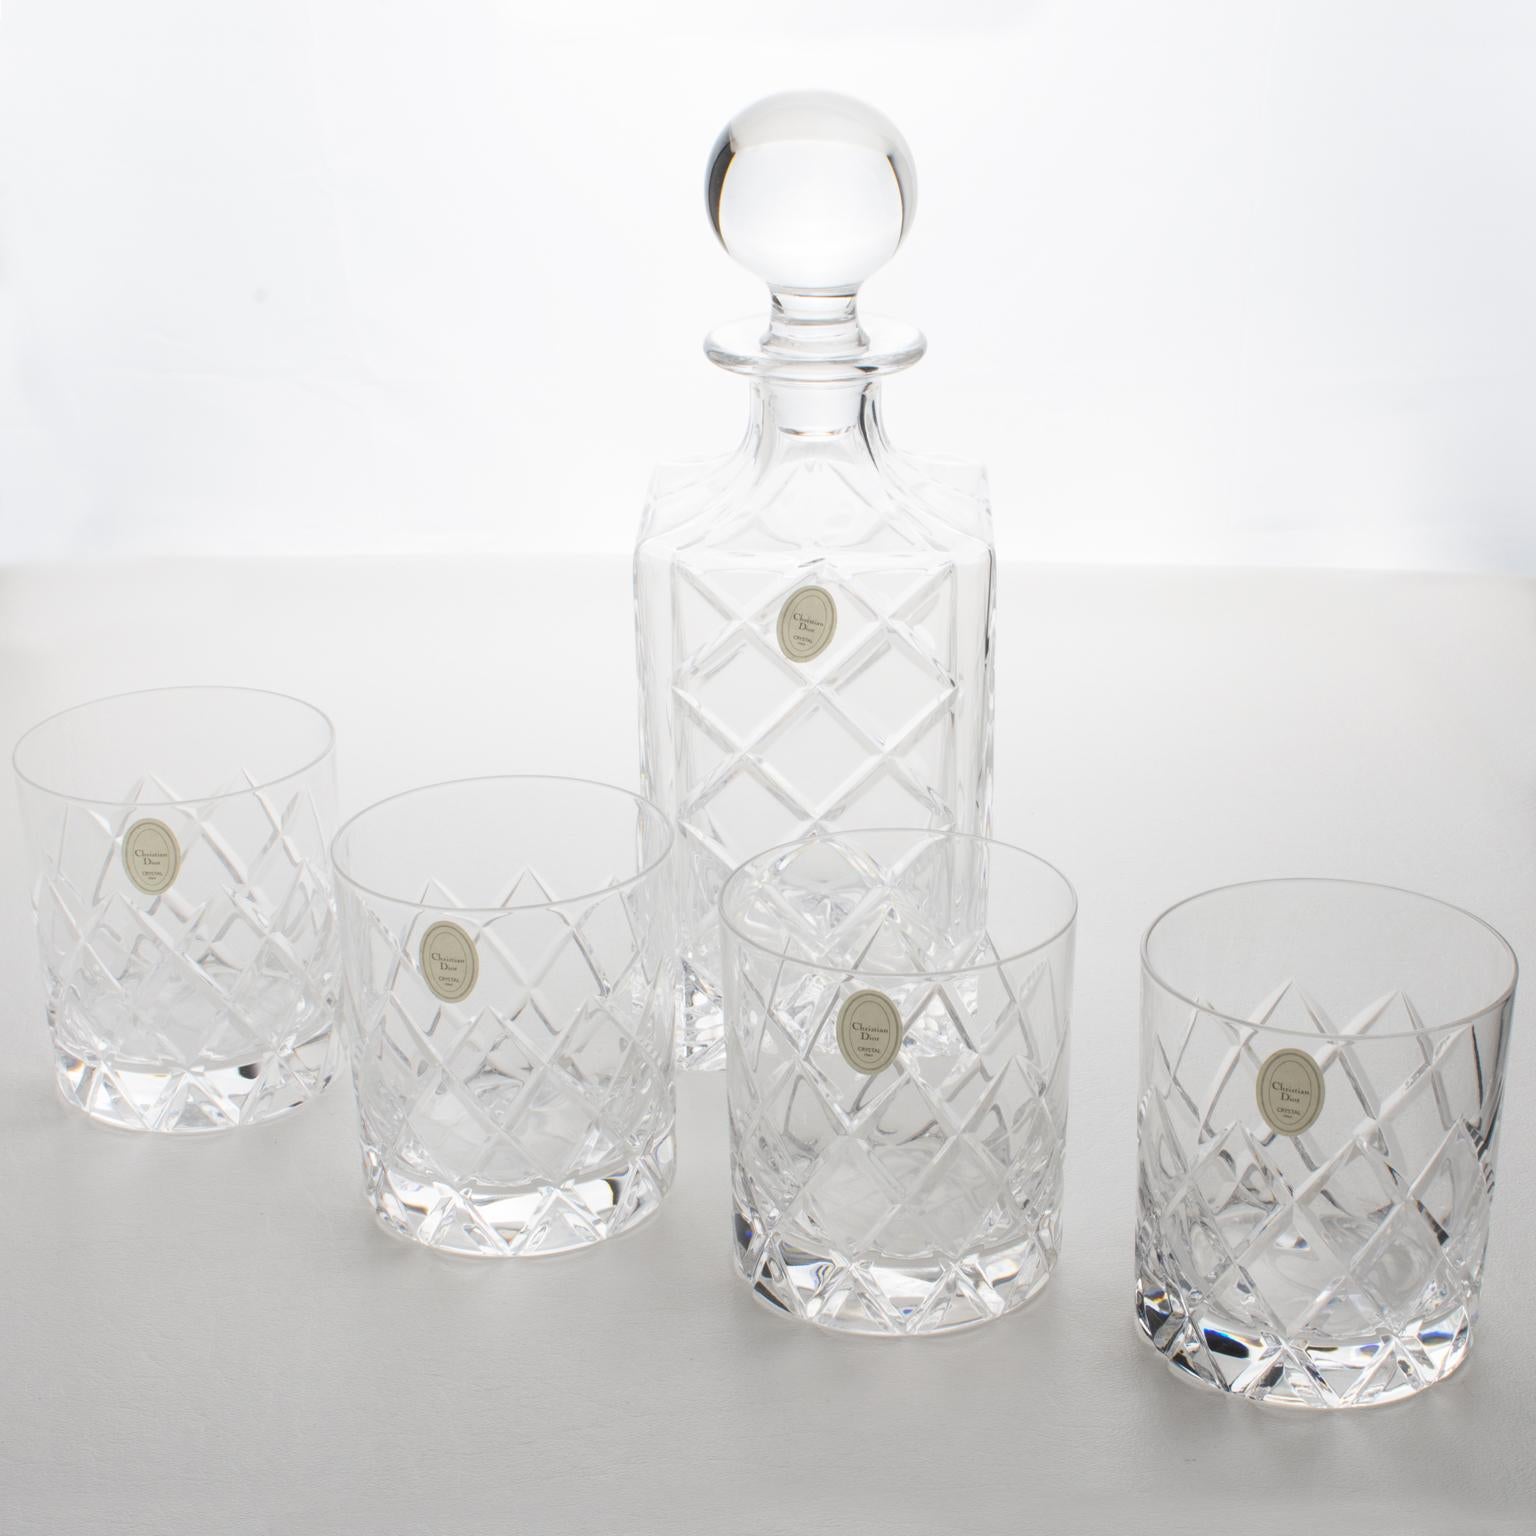 Christian Dior Crystal Decanter and Glasses Set, 5 pieces in Original Box, 1980s 3